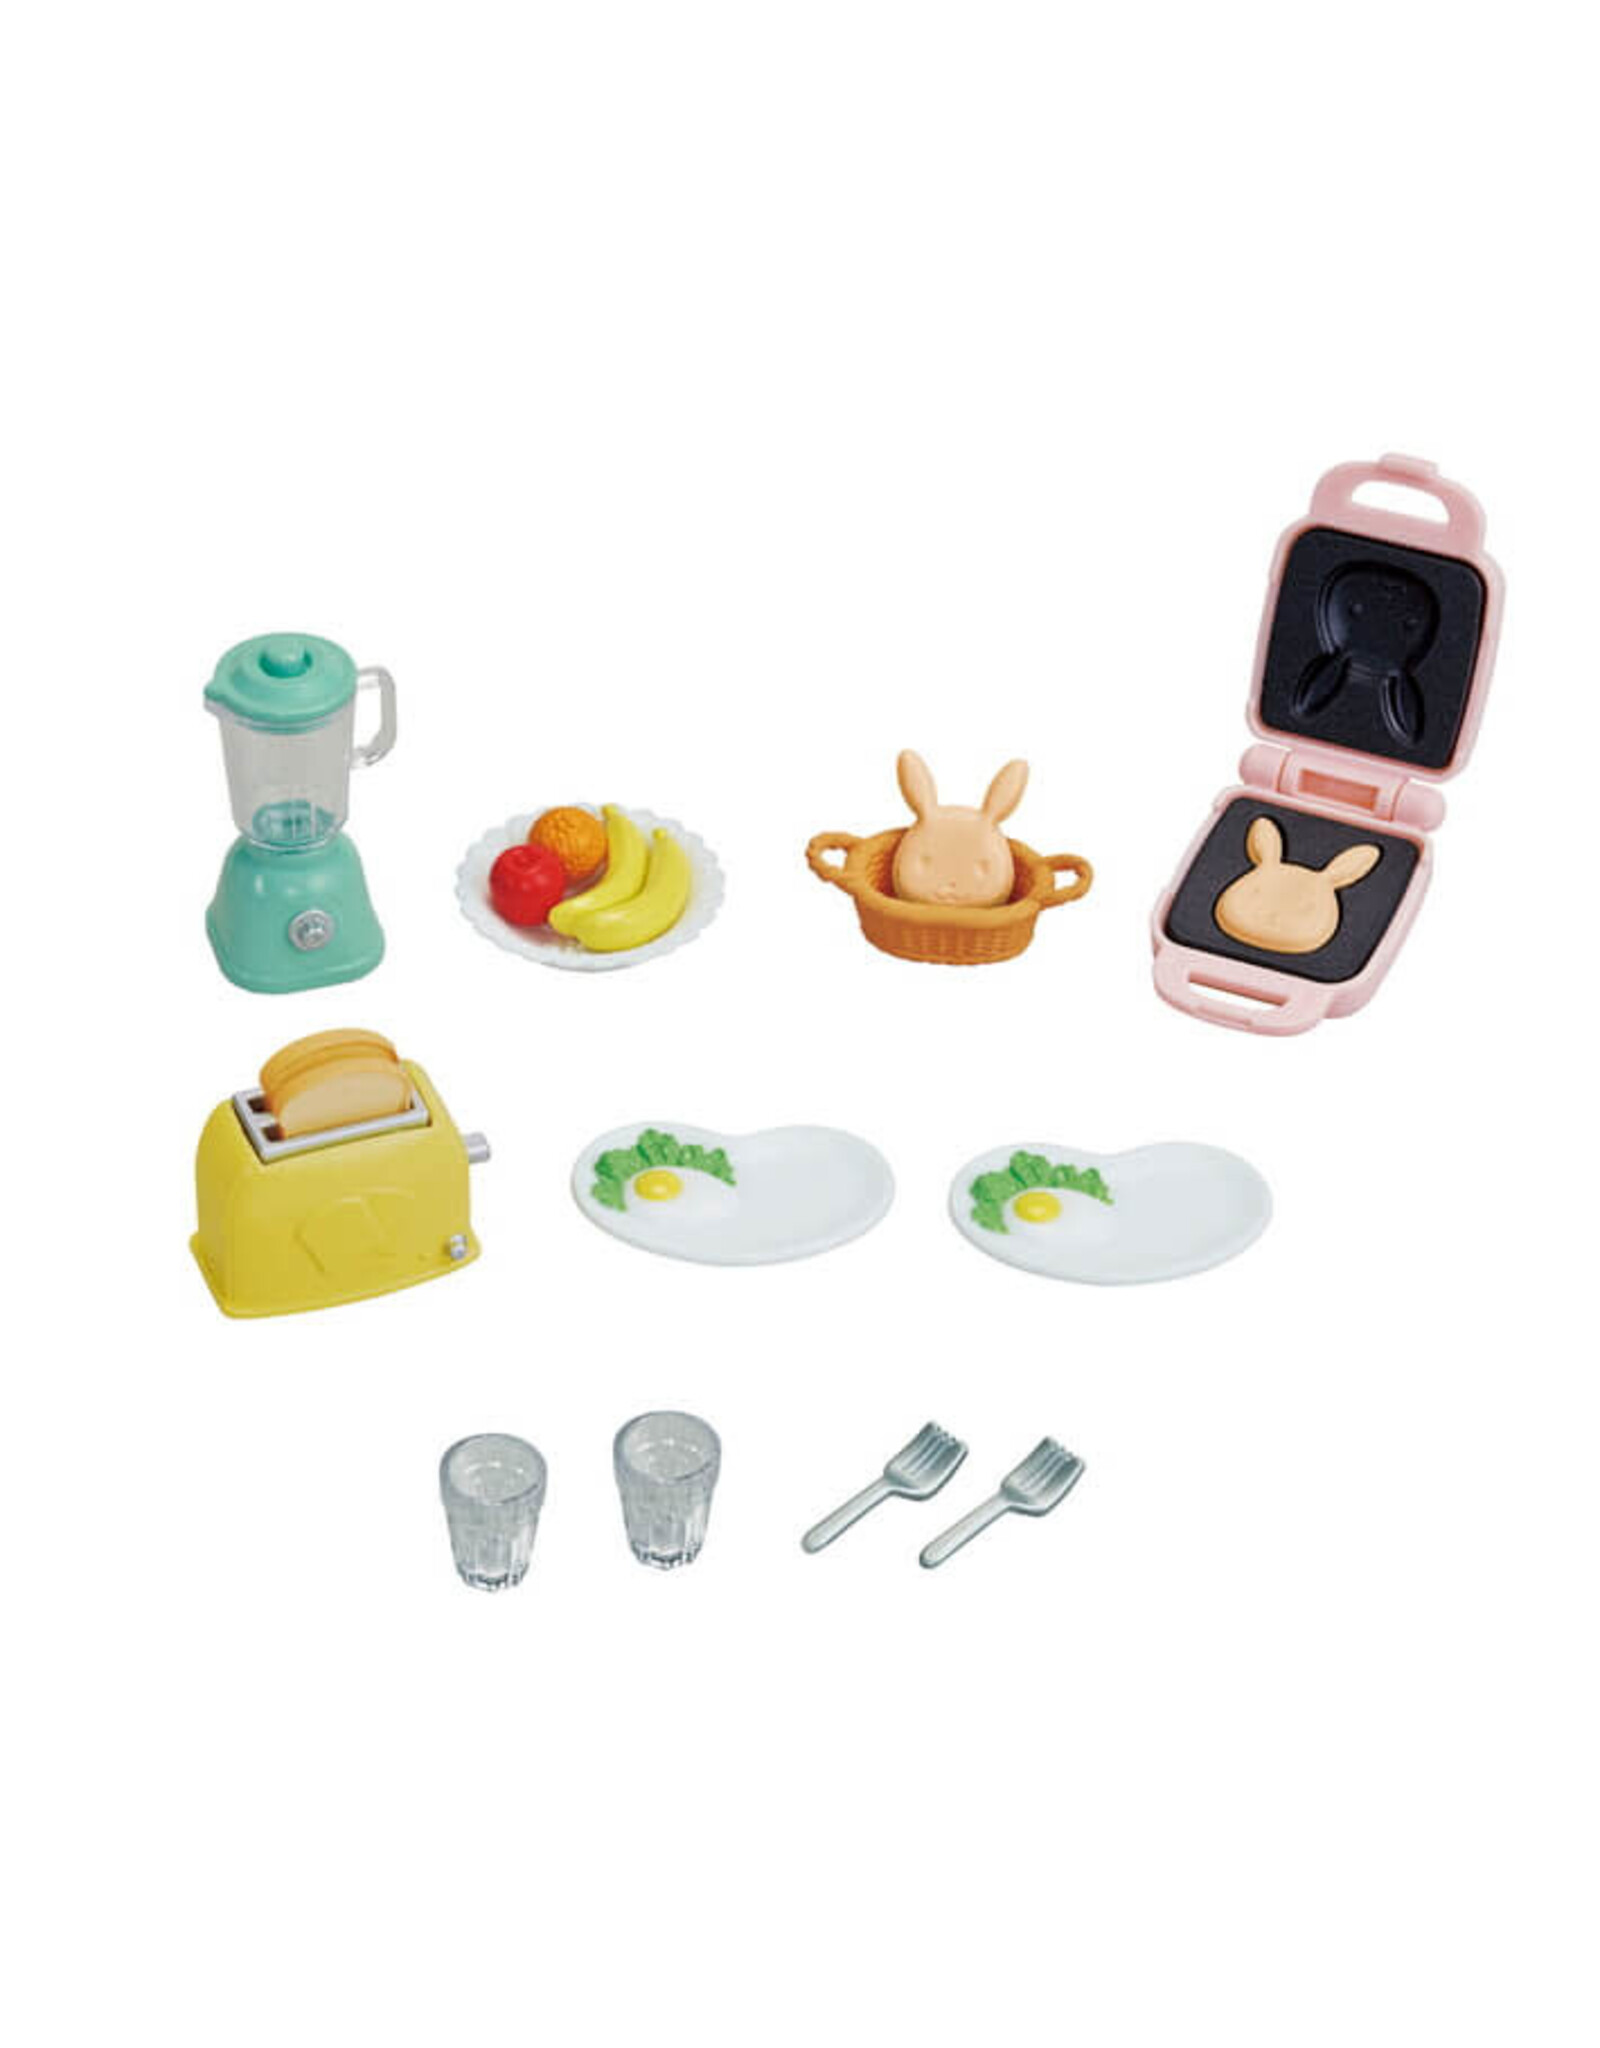 Calico Critters: Breakfast Playset